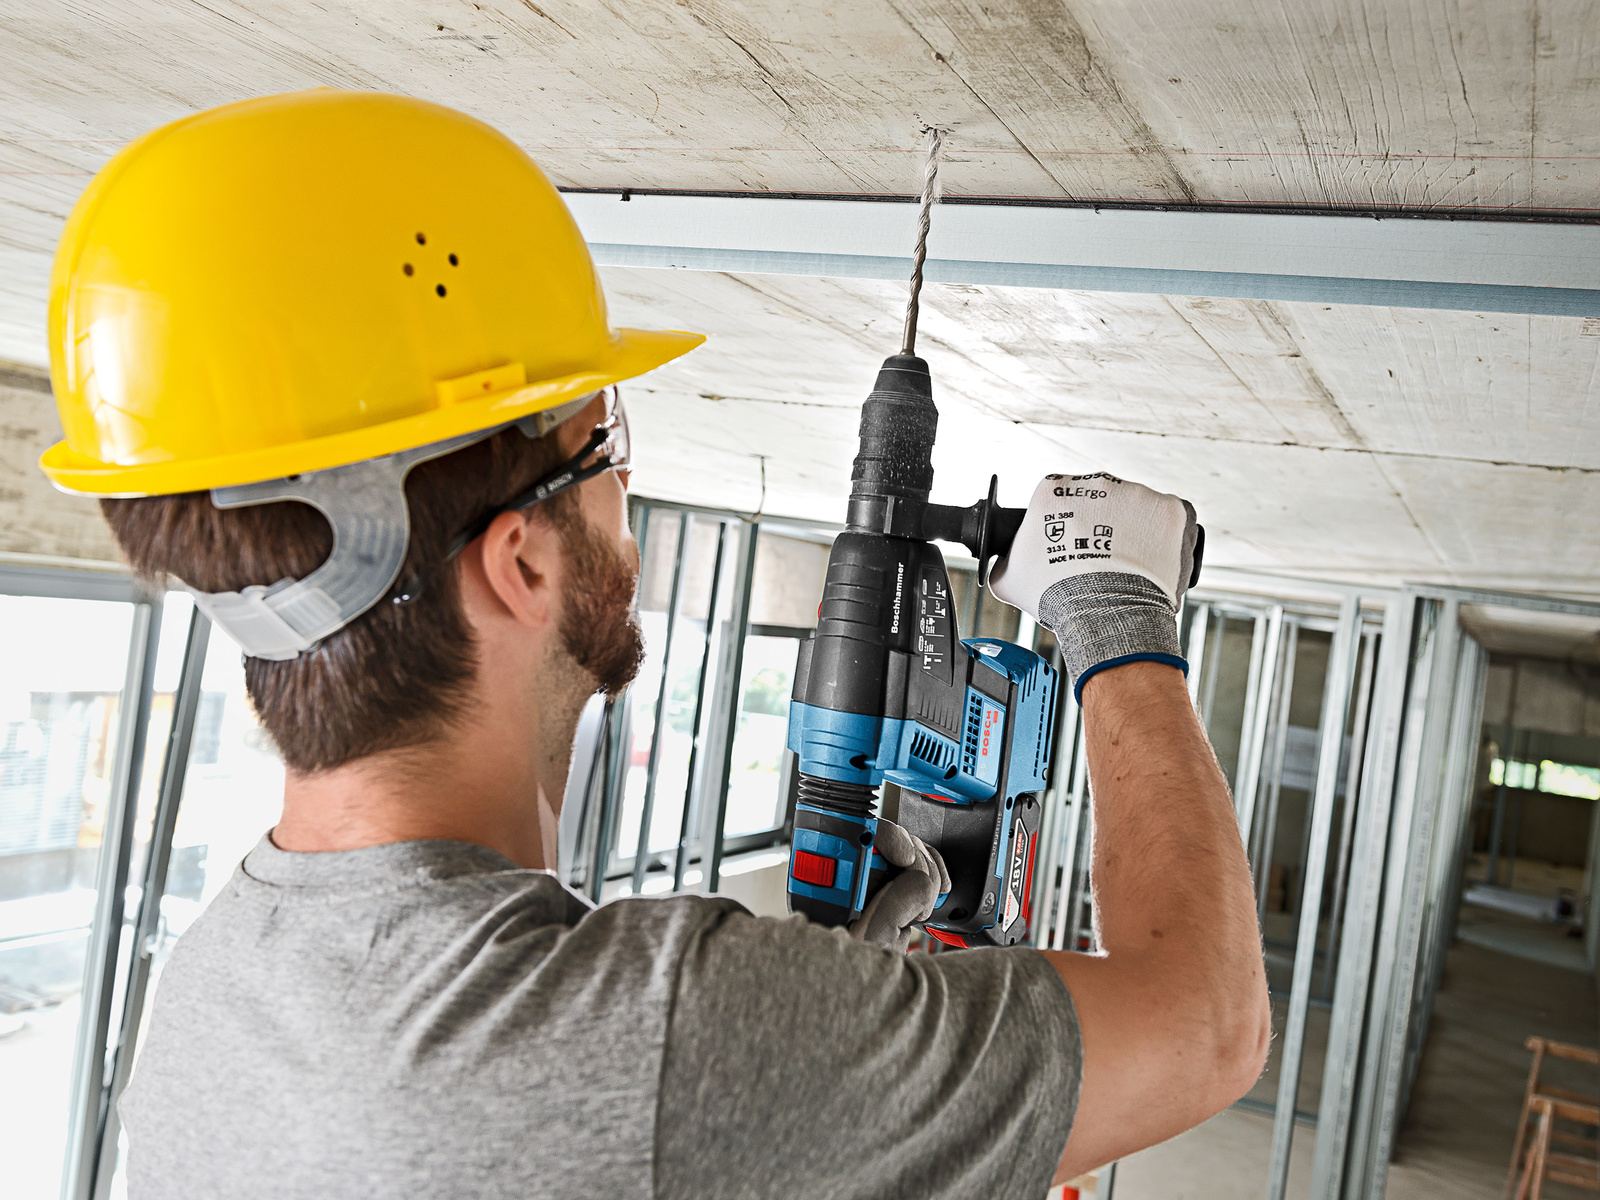 New Bosch 18 Volt Rotary Hammers For Professionals Bosch Media Service